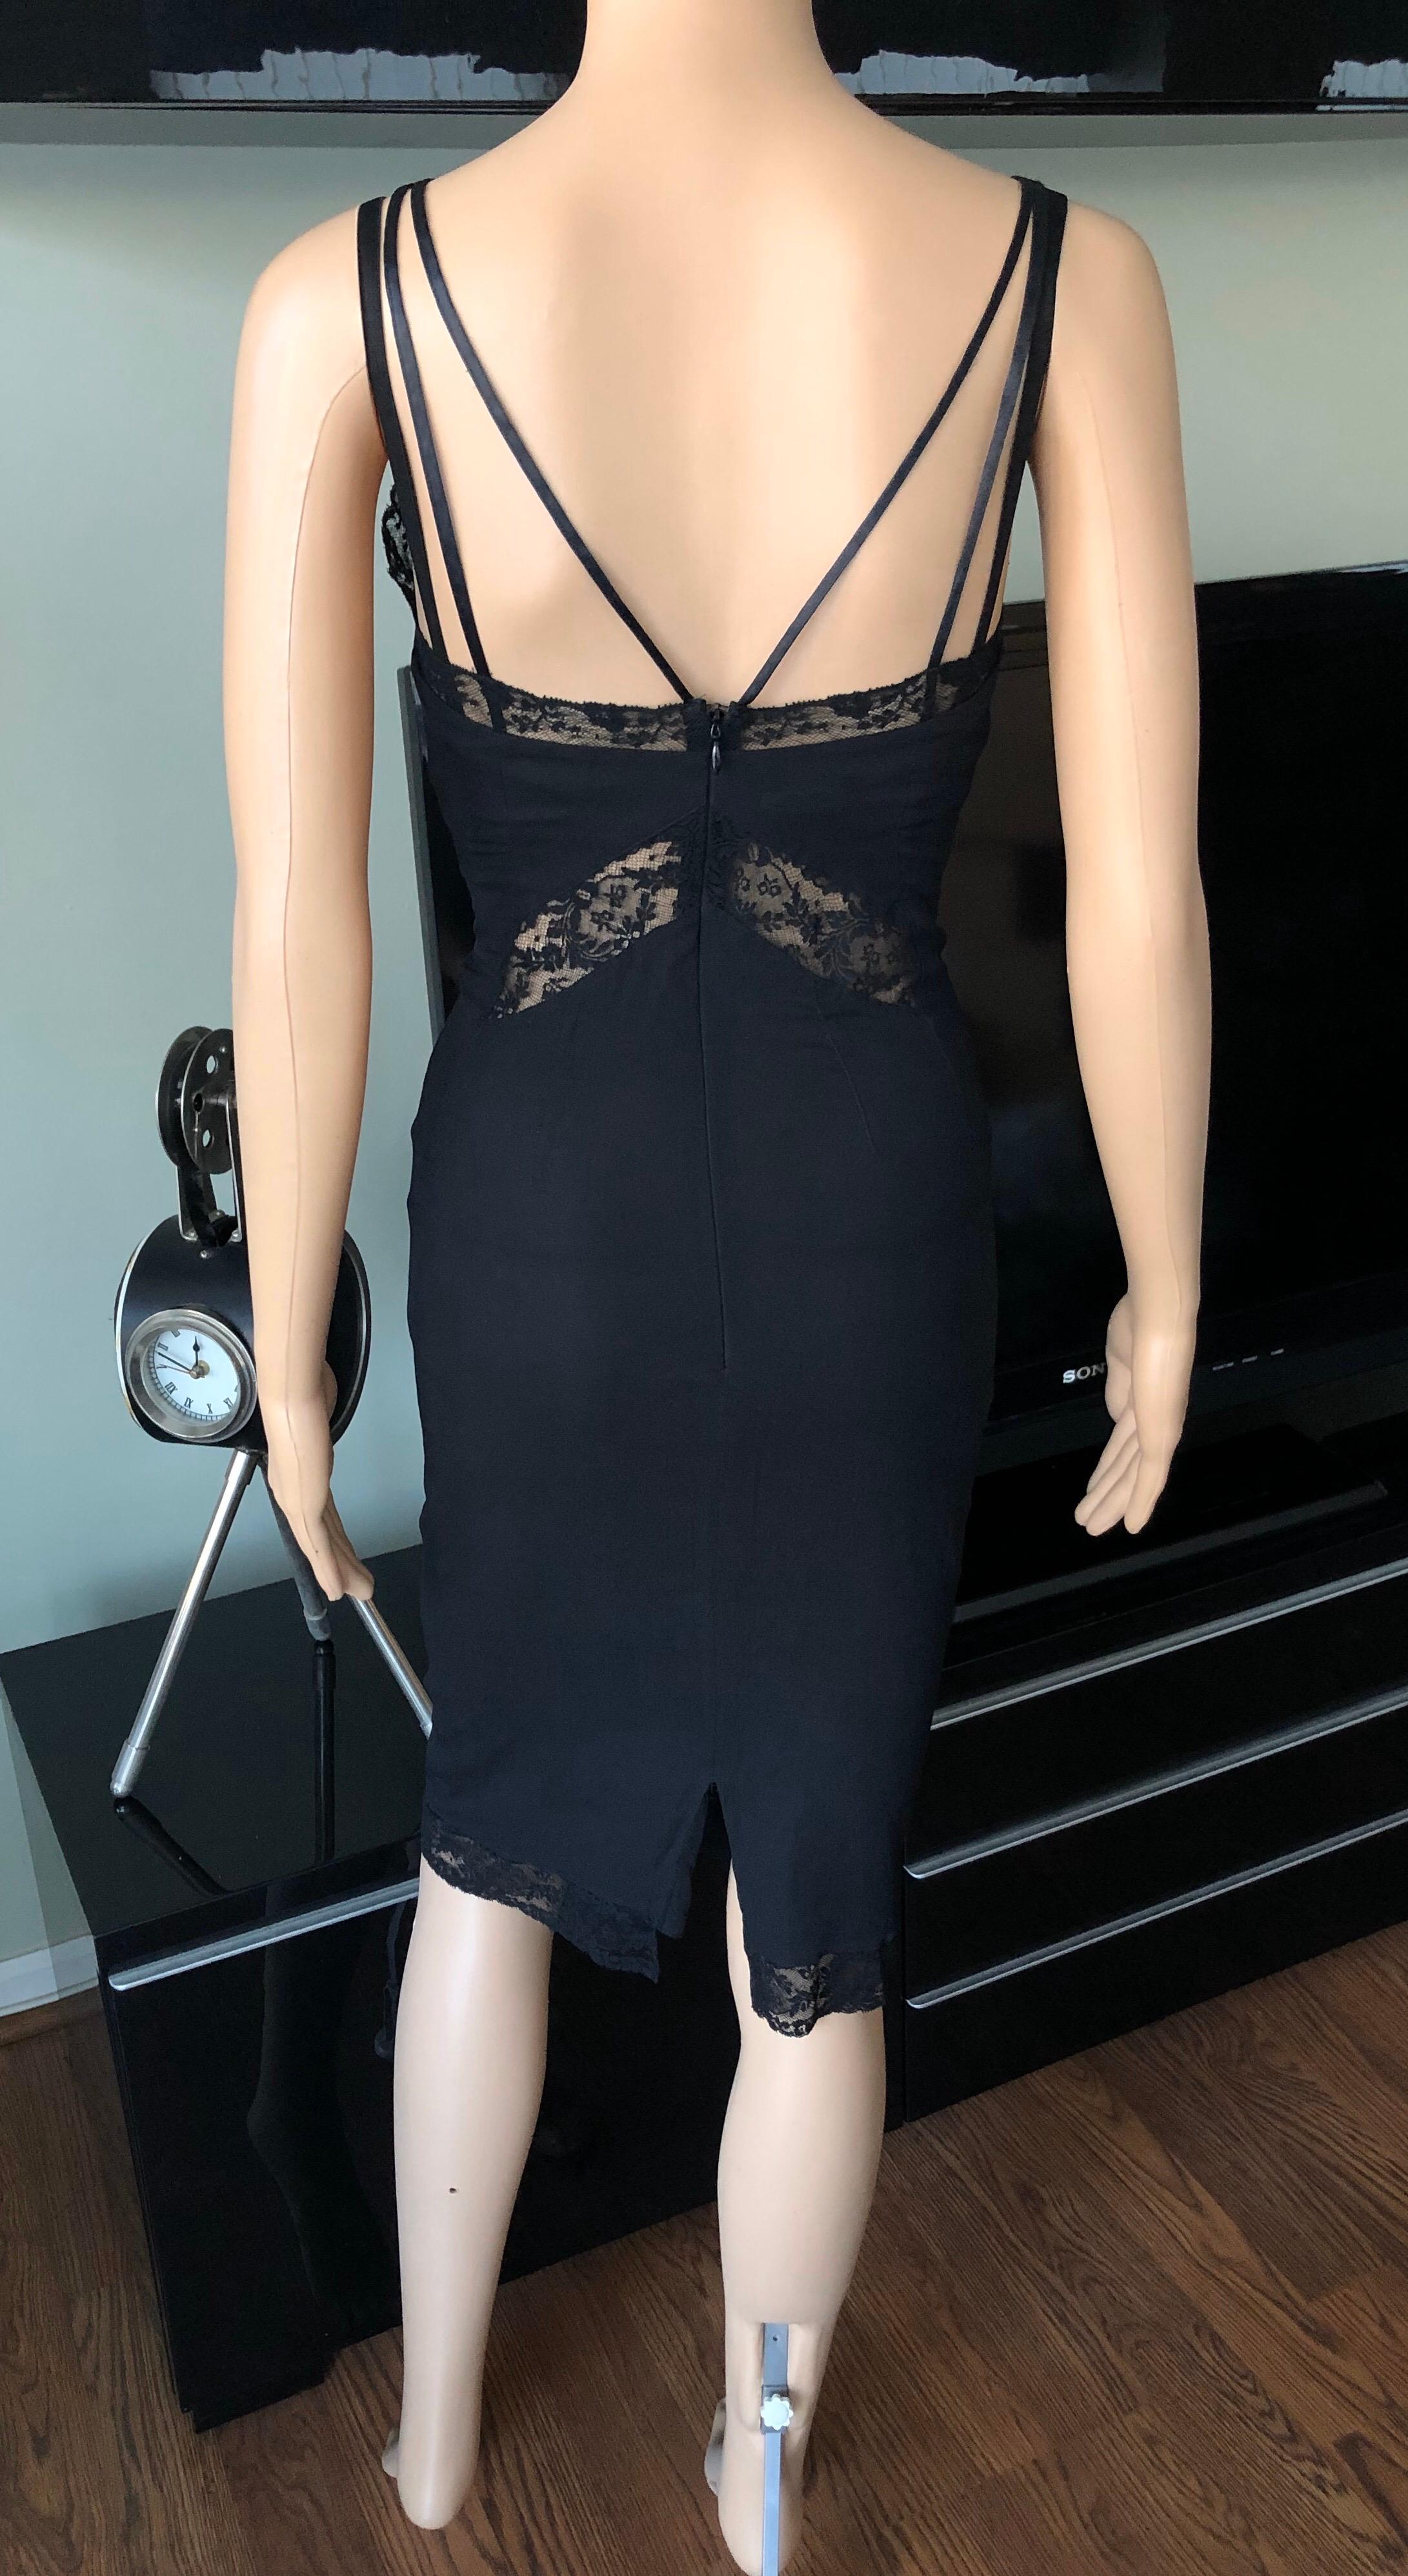 D&G by Dolce & Gabbana c. 2001 Corset Lace Up Bra Black Dress In Good Condition For Sale In Naples, FL